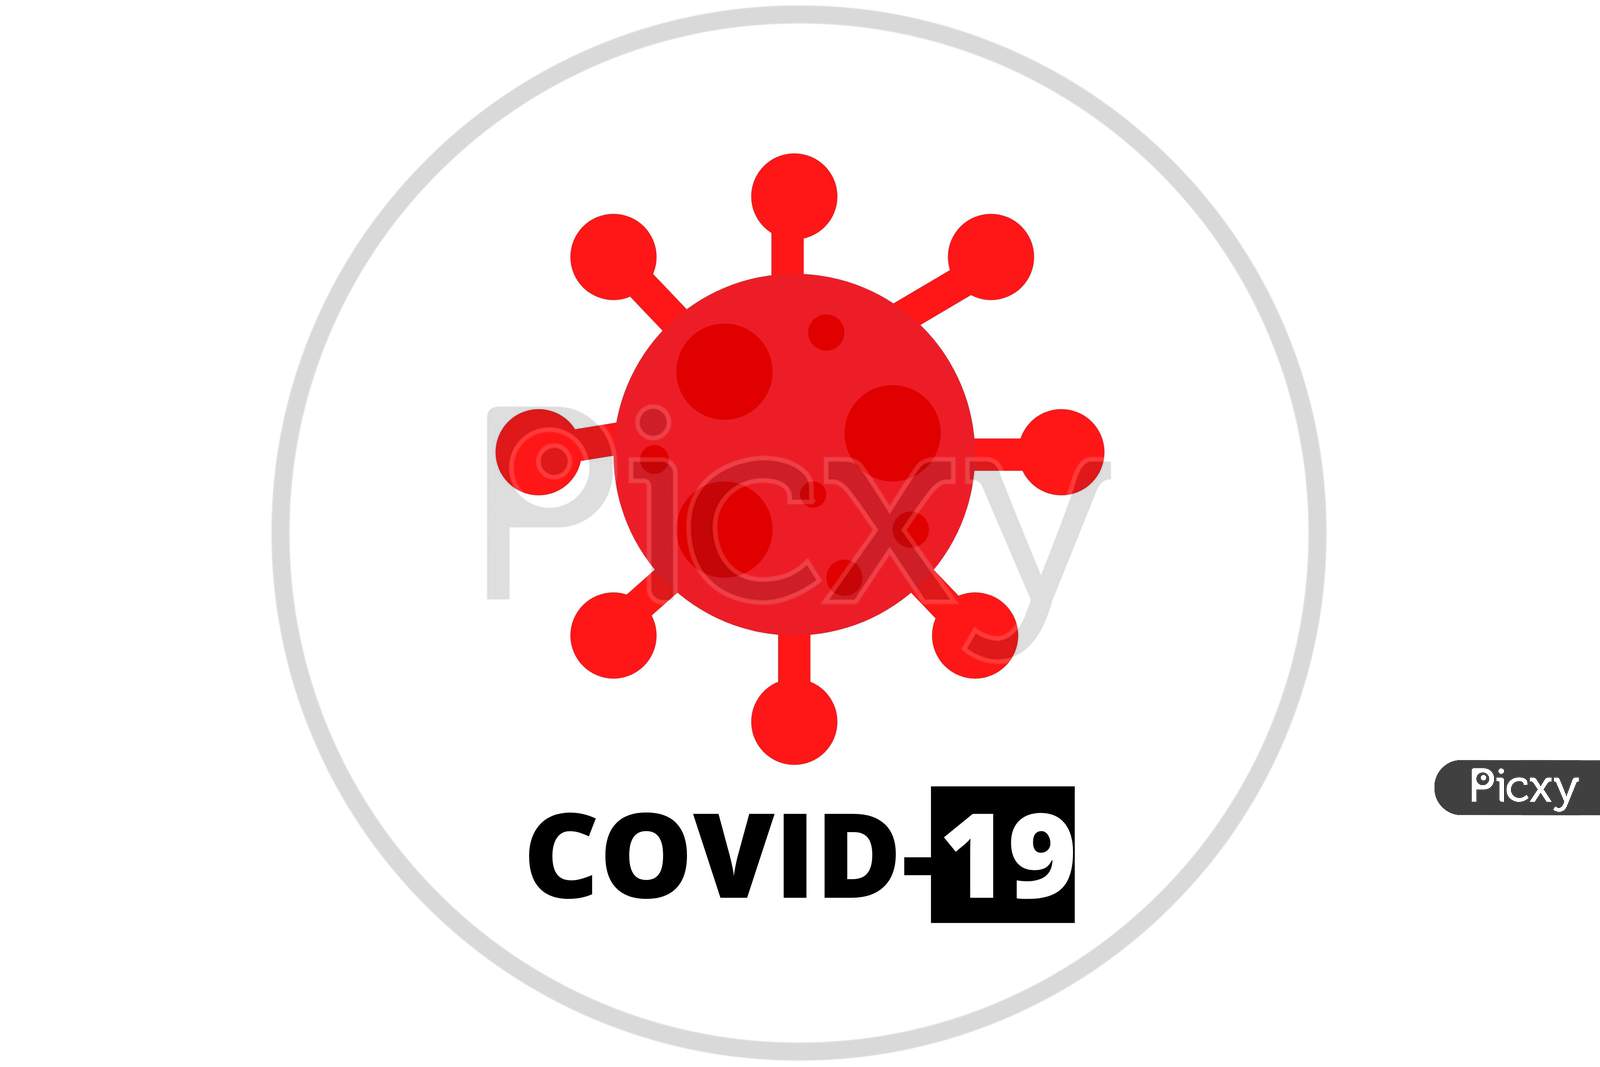 COVID19 on white background with typography